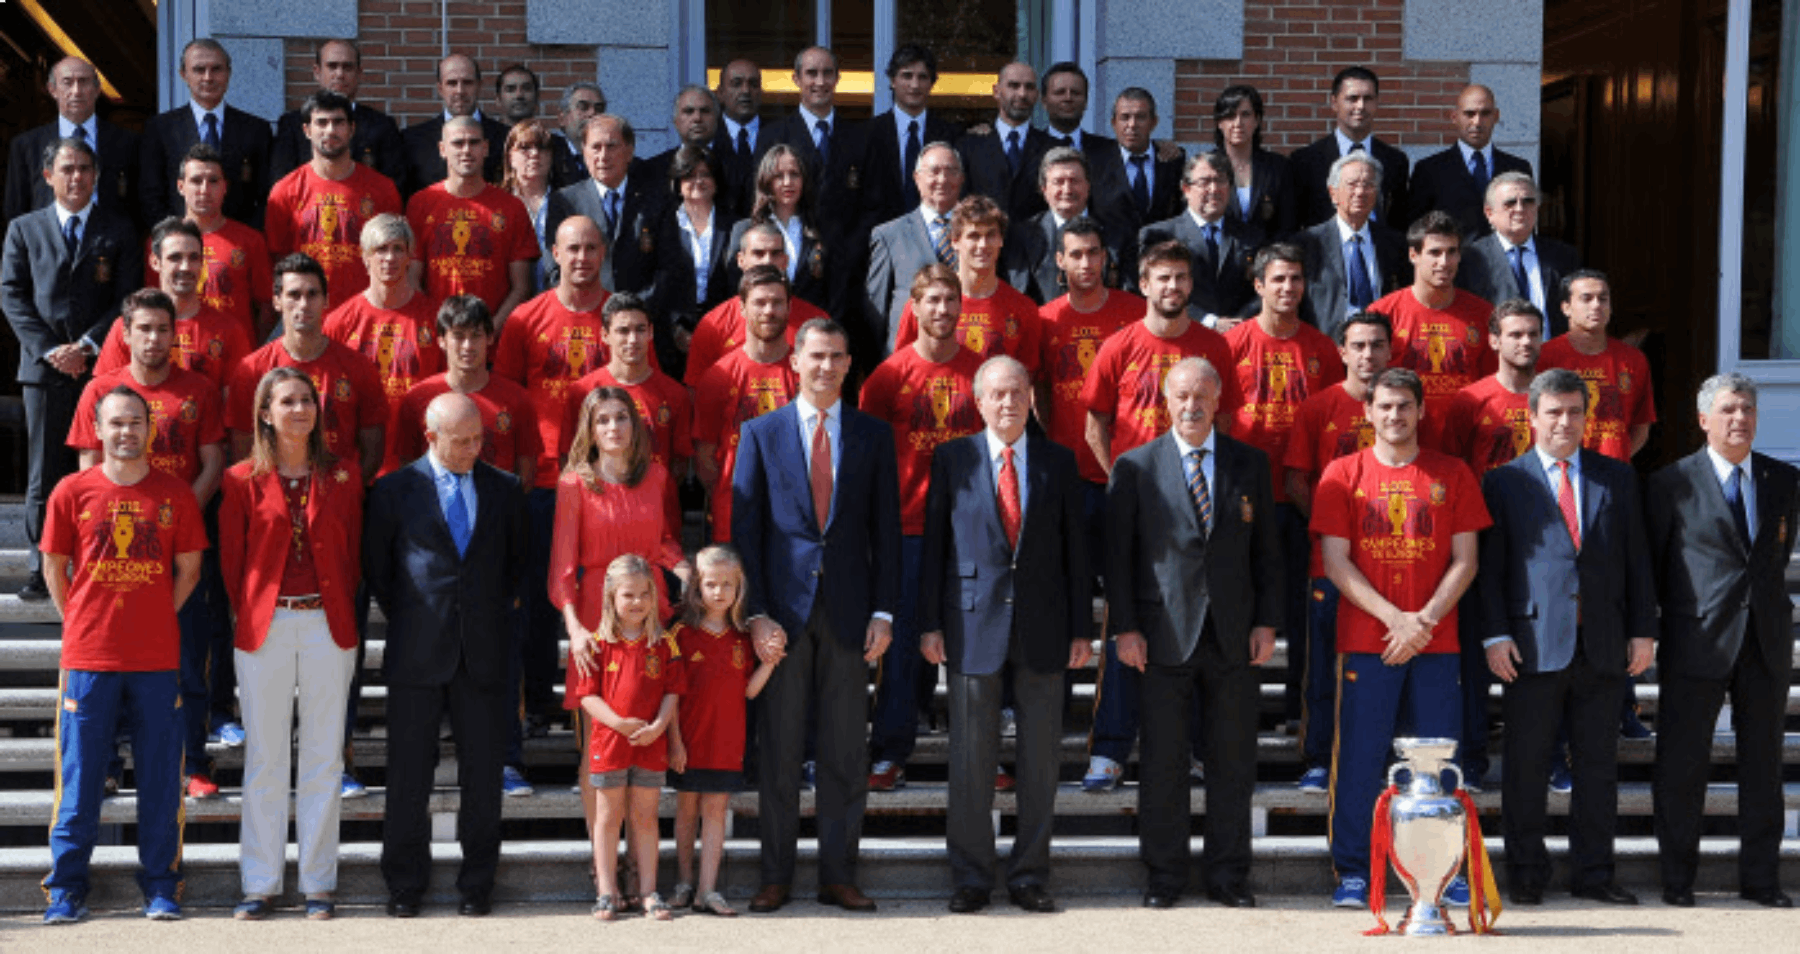 The King and Queen of Spain and the emeritus, with the World Champion Team in 2010 / Gtres